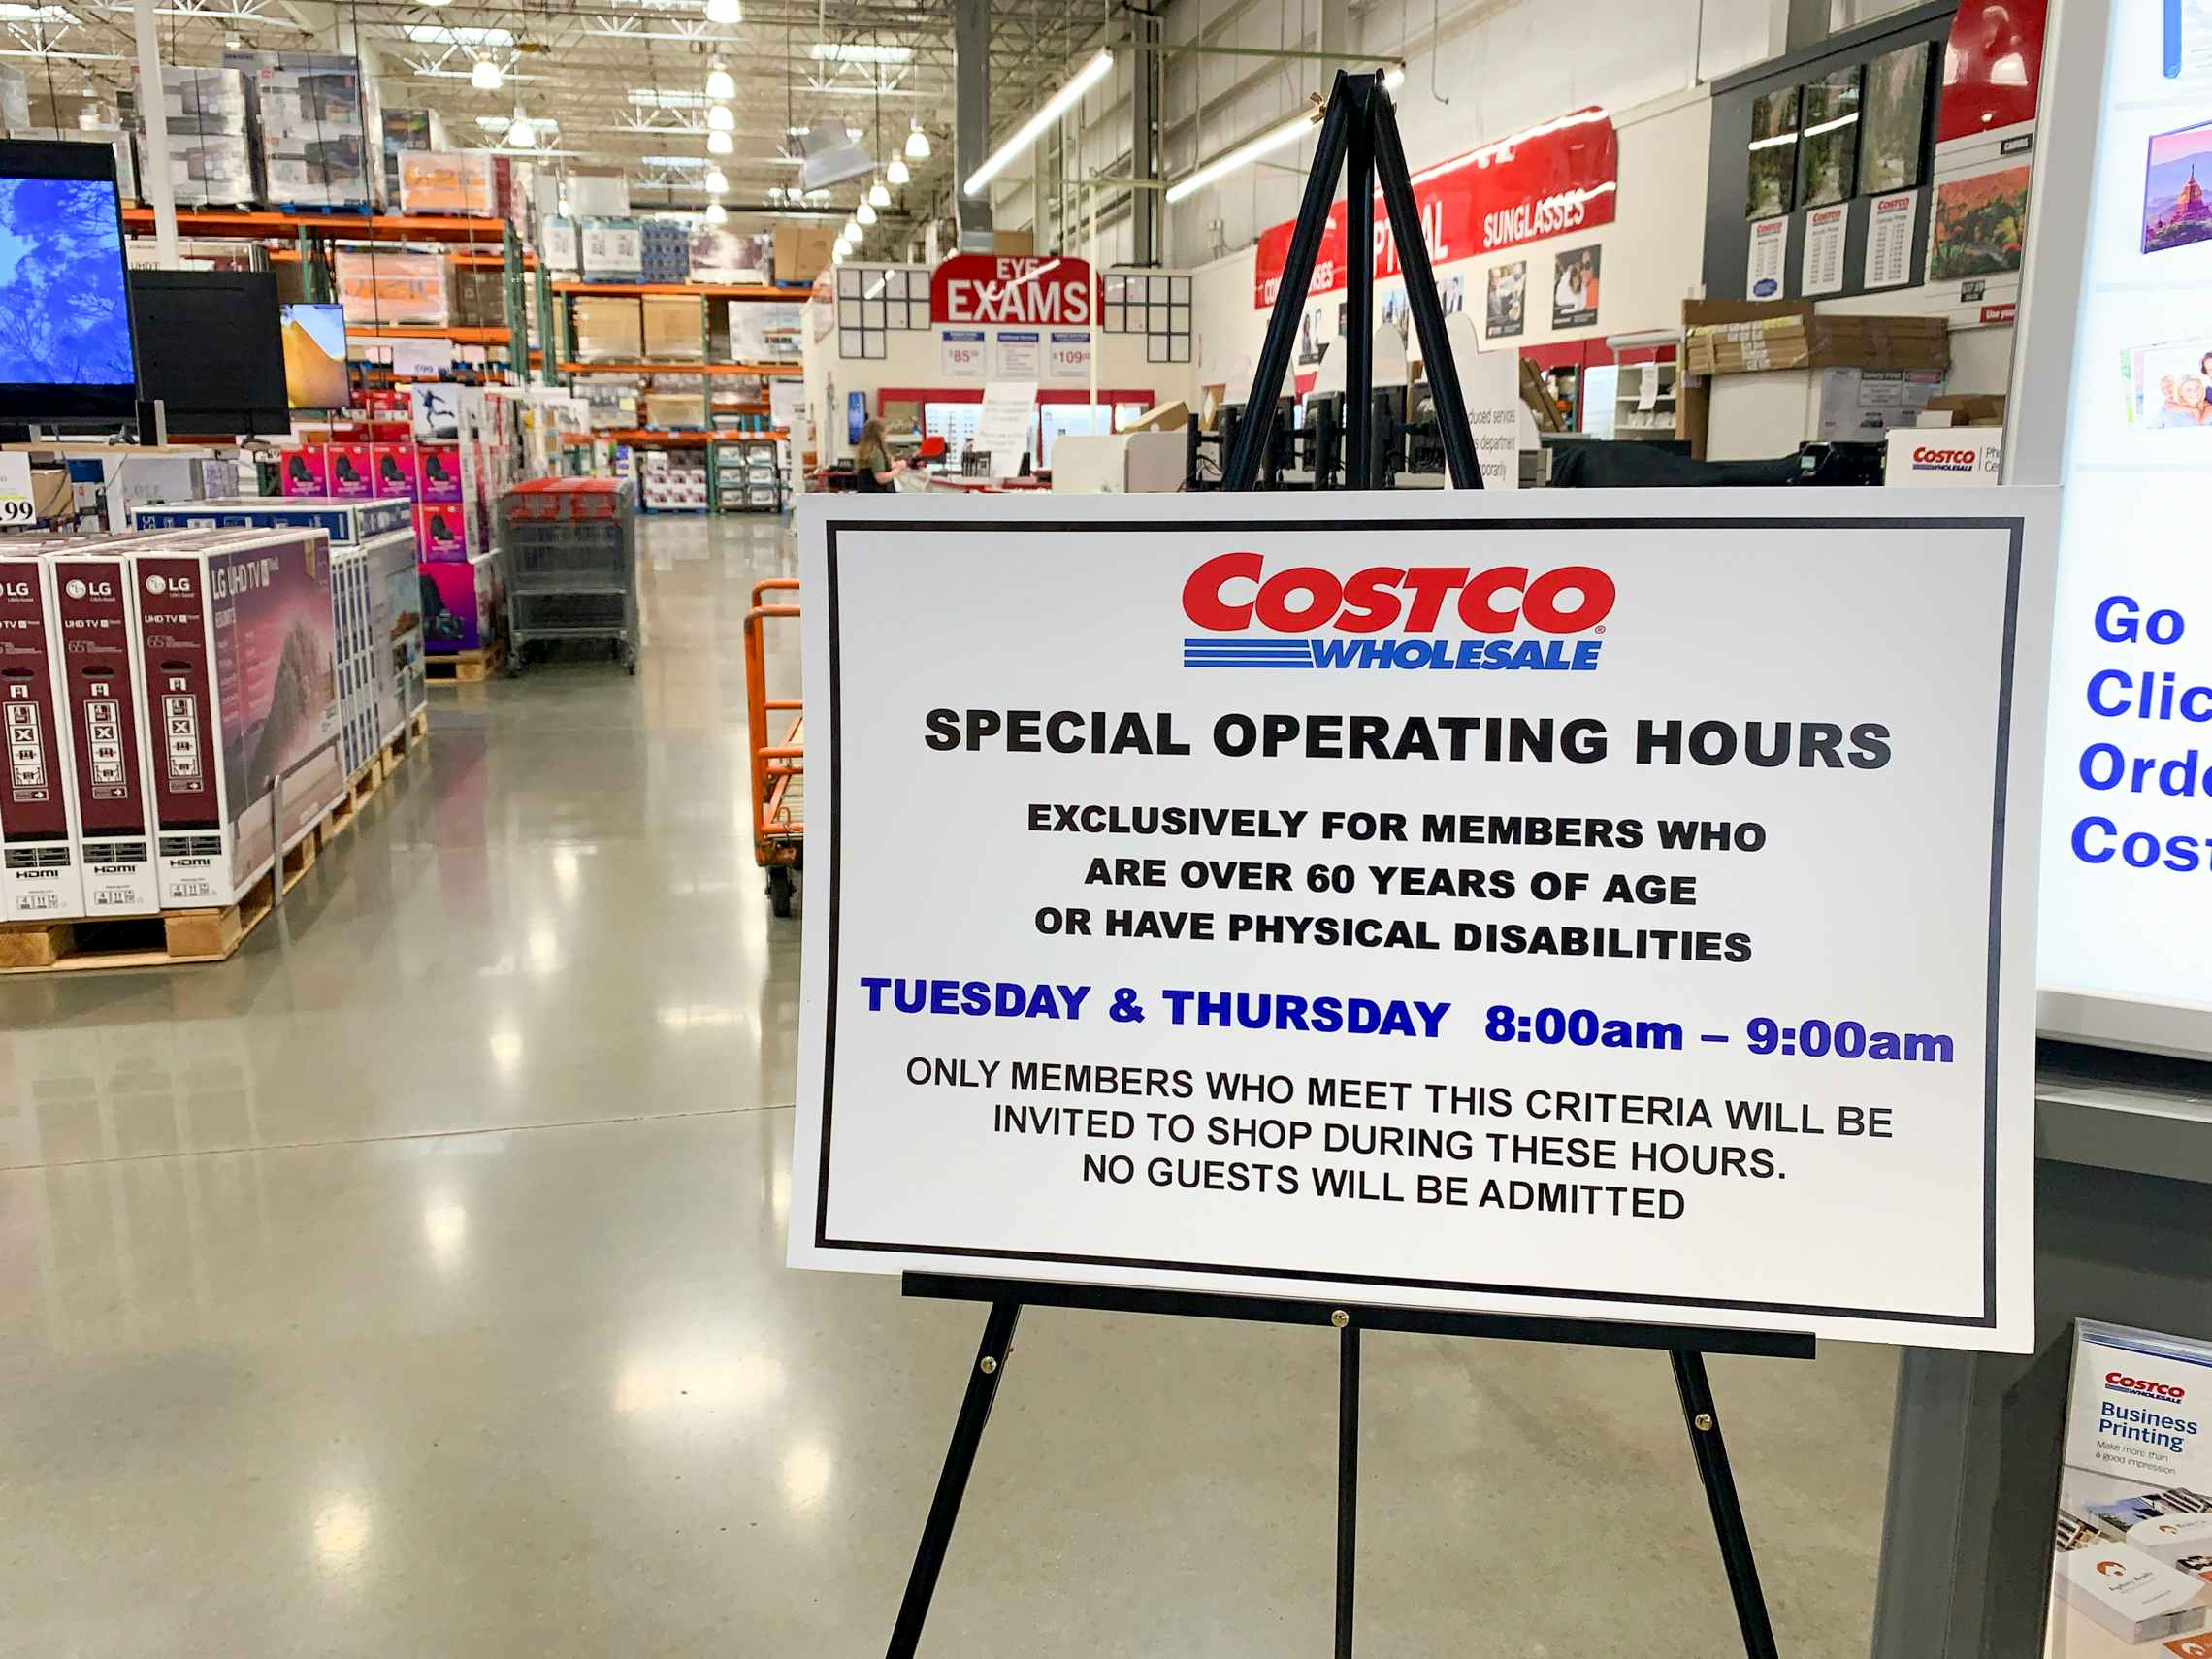 A Costco sign explaining the "special operating hours" for seniors and people with disabilities.